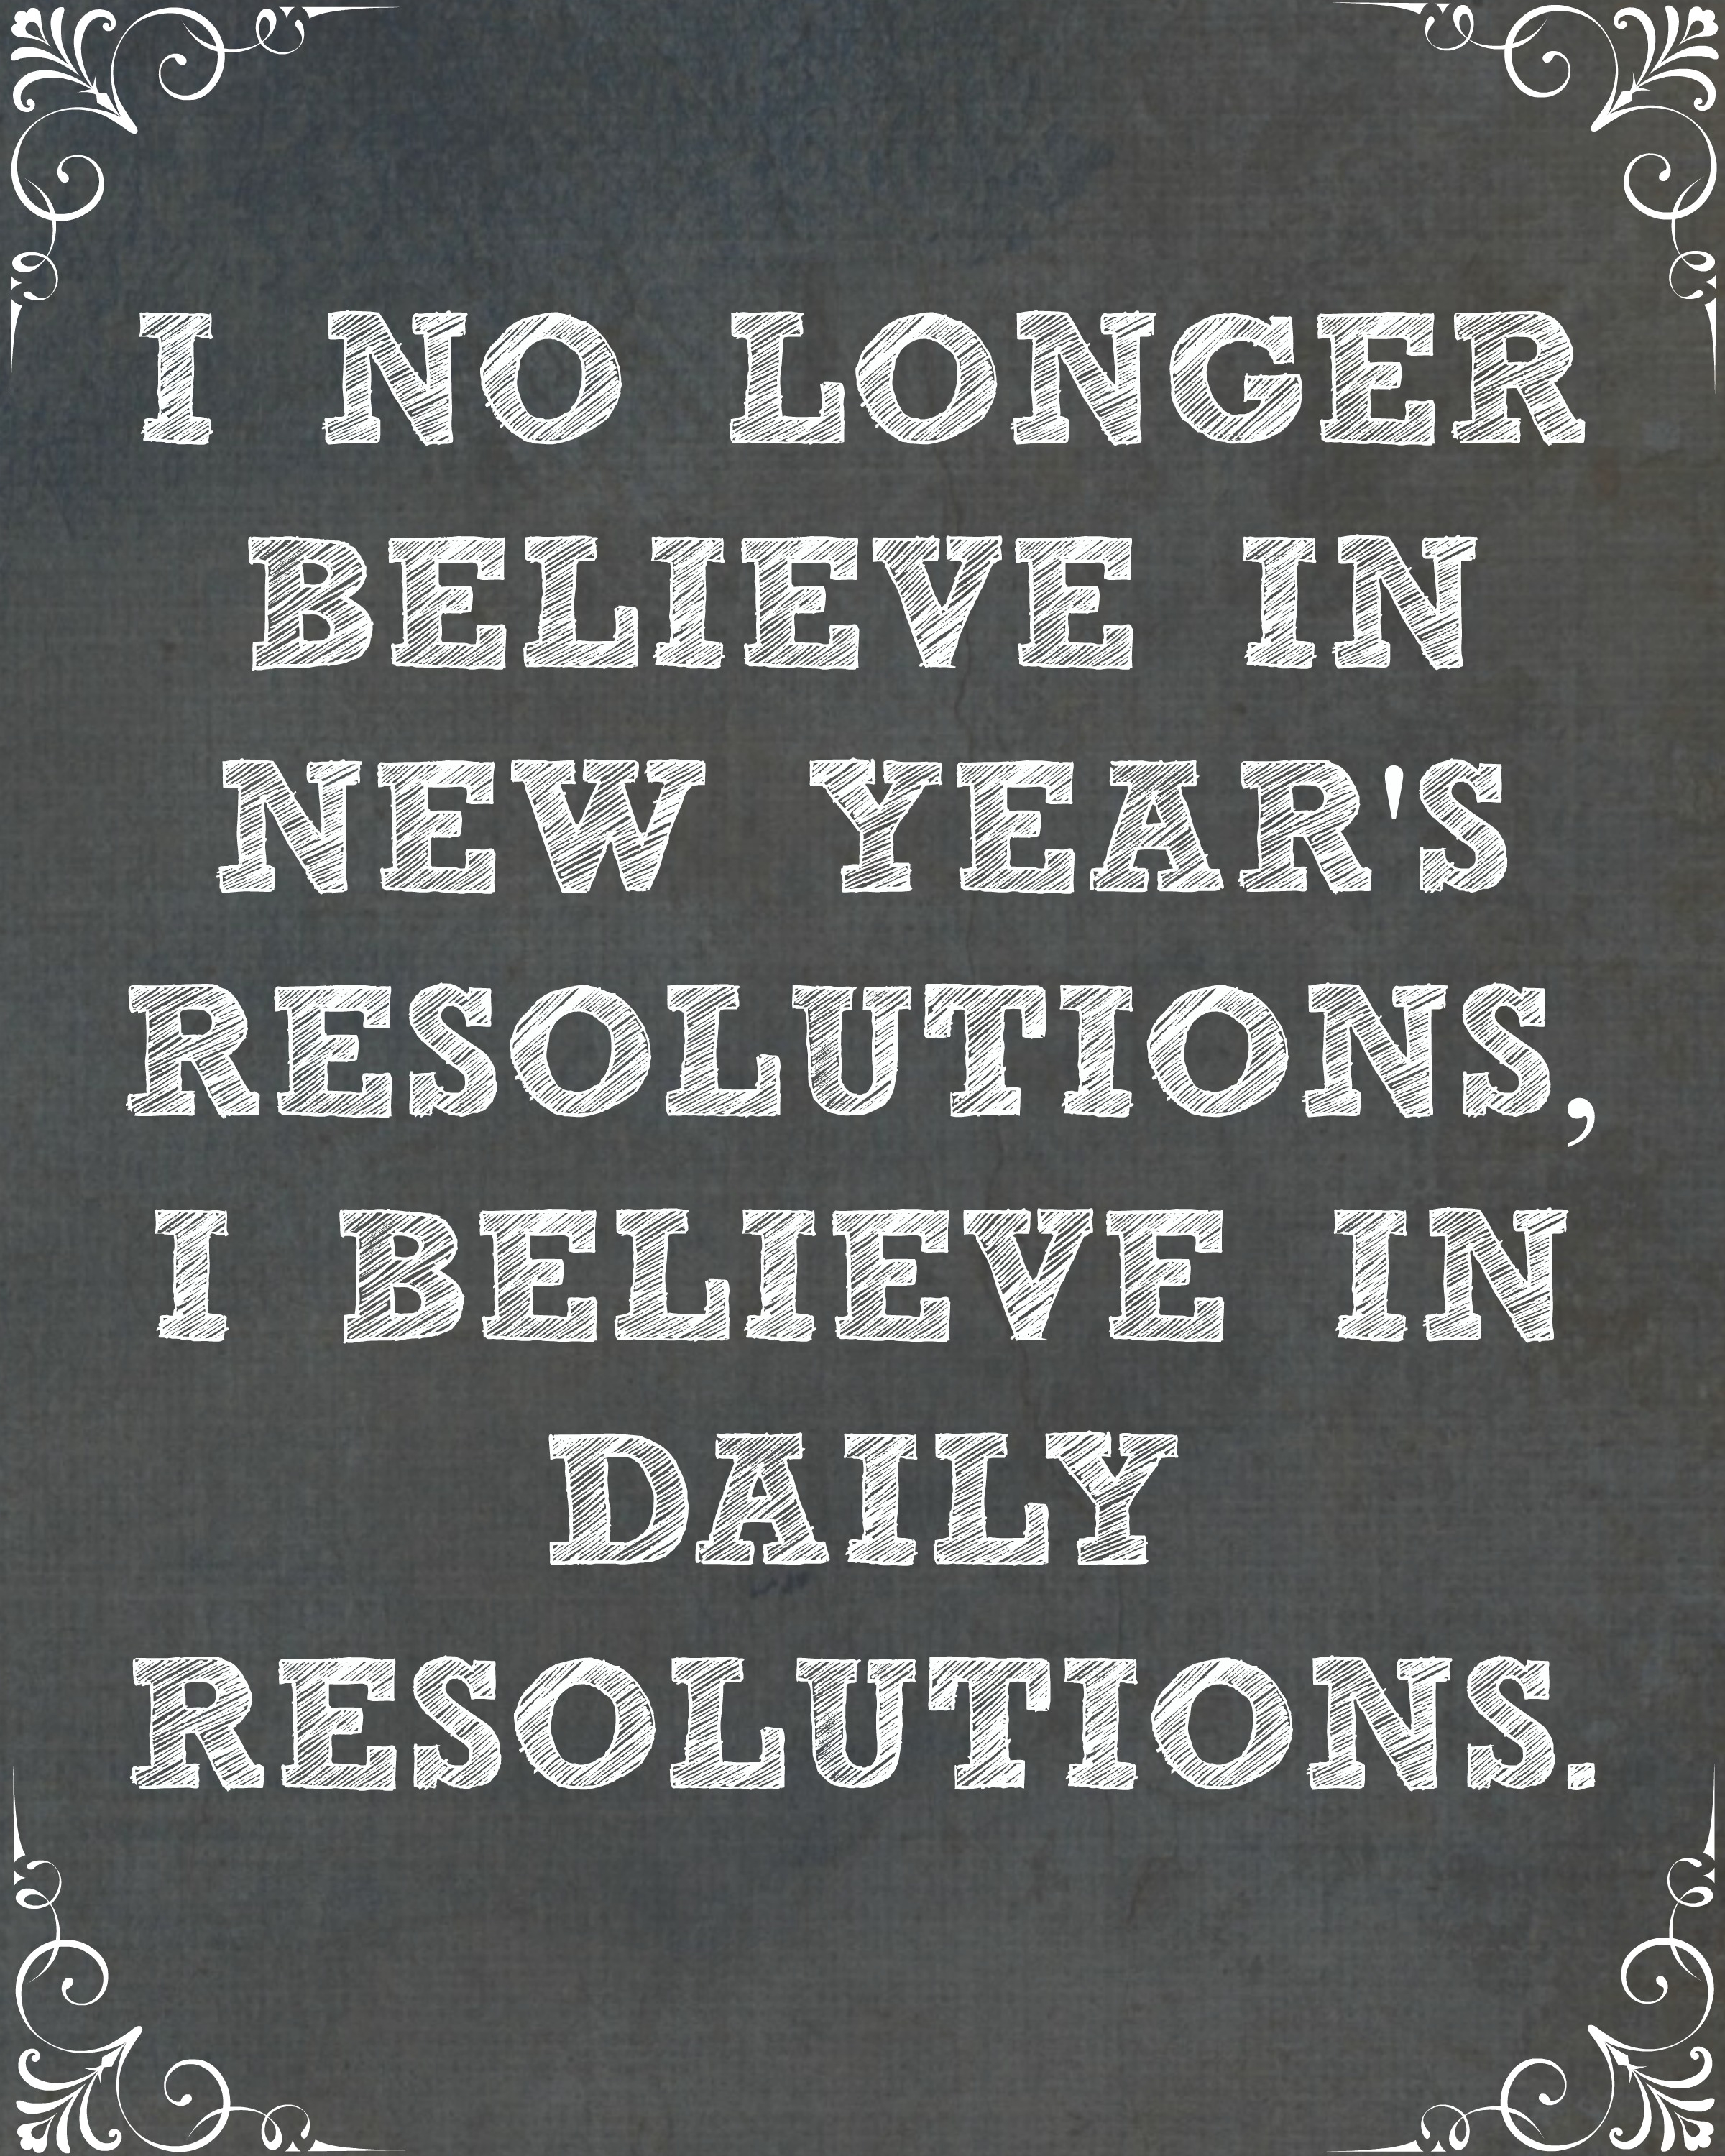 Daily Resolutions